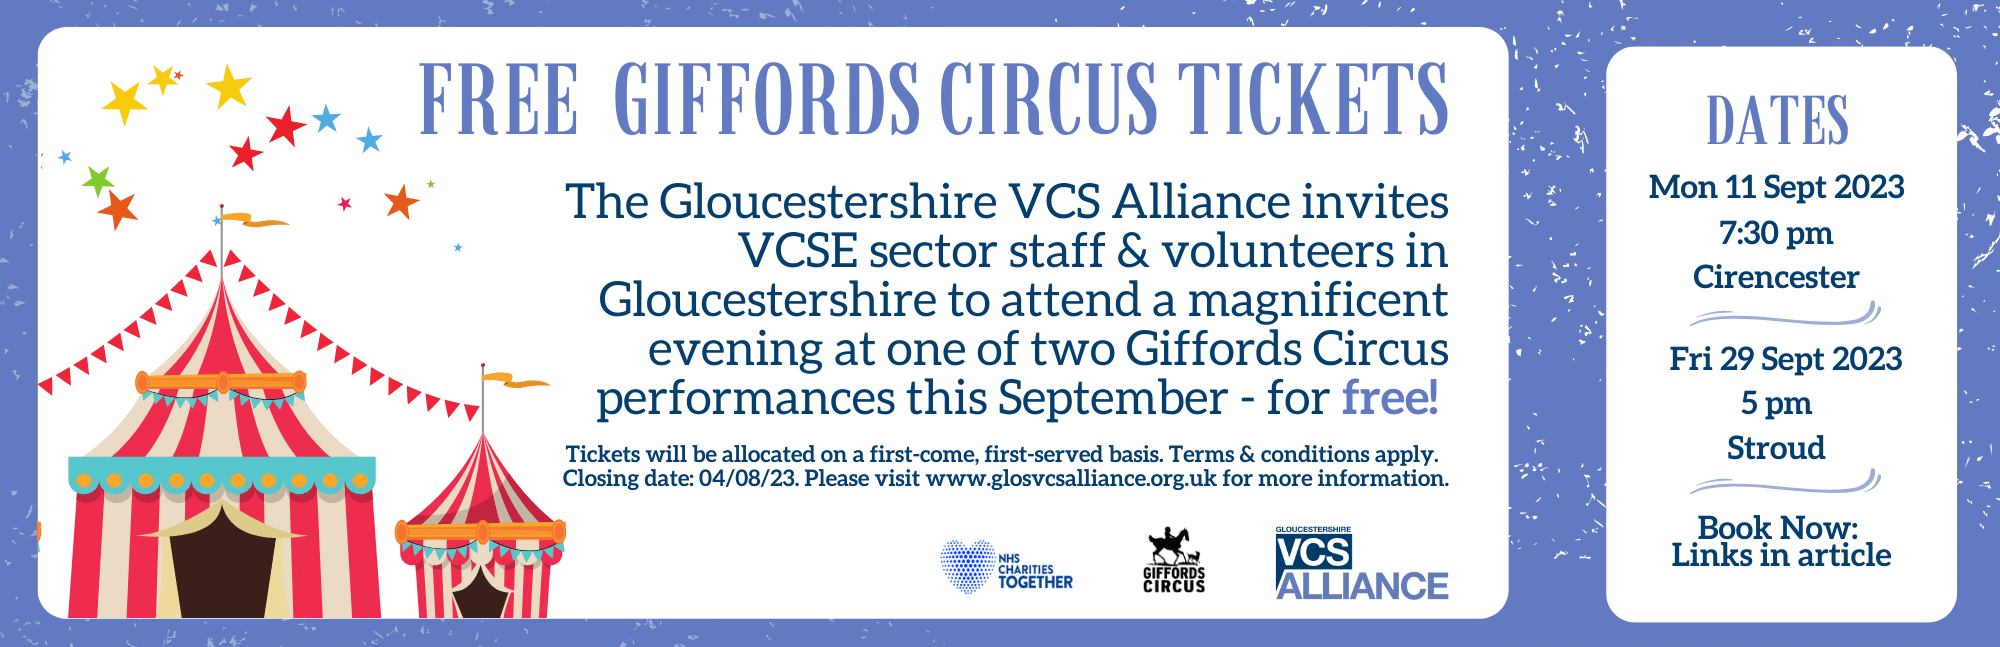 Free Giffords Circus Tickets for VCSE sector in Gloucs Glos VCS Alliance